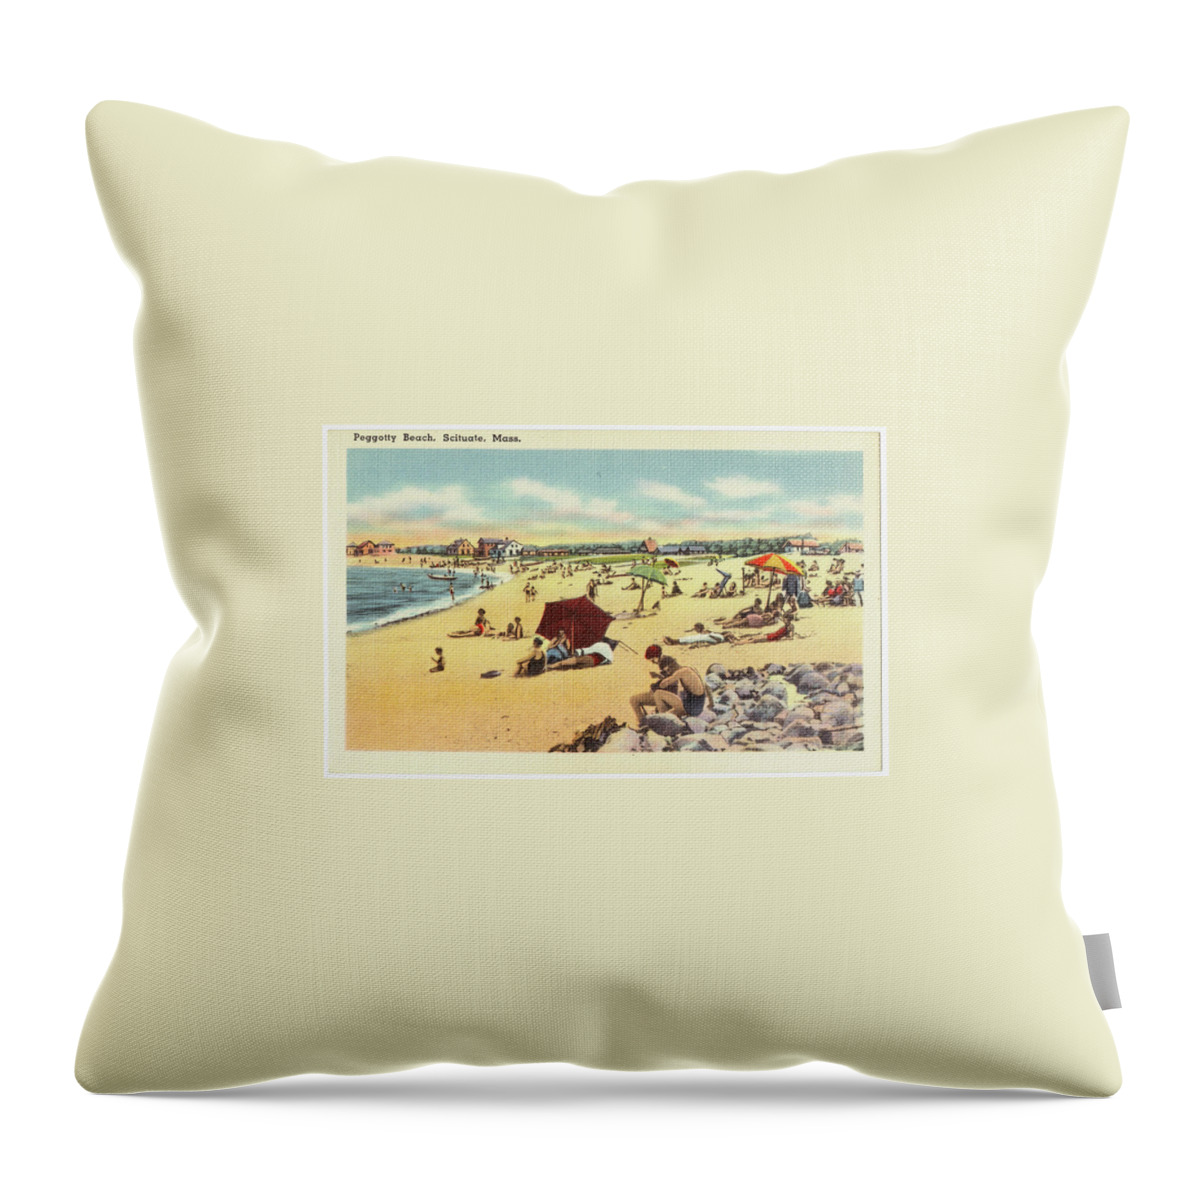  Throw Pillow featuring the digital art 19 by Cindy Greenstein